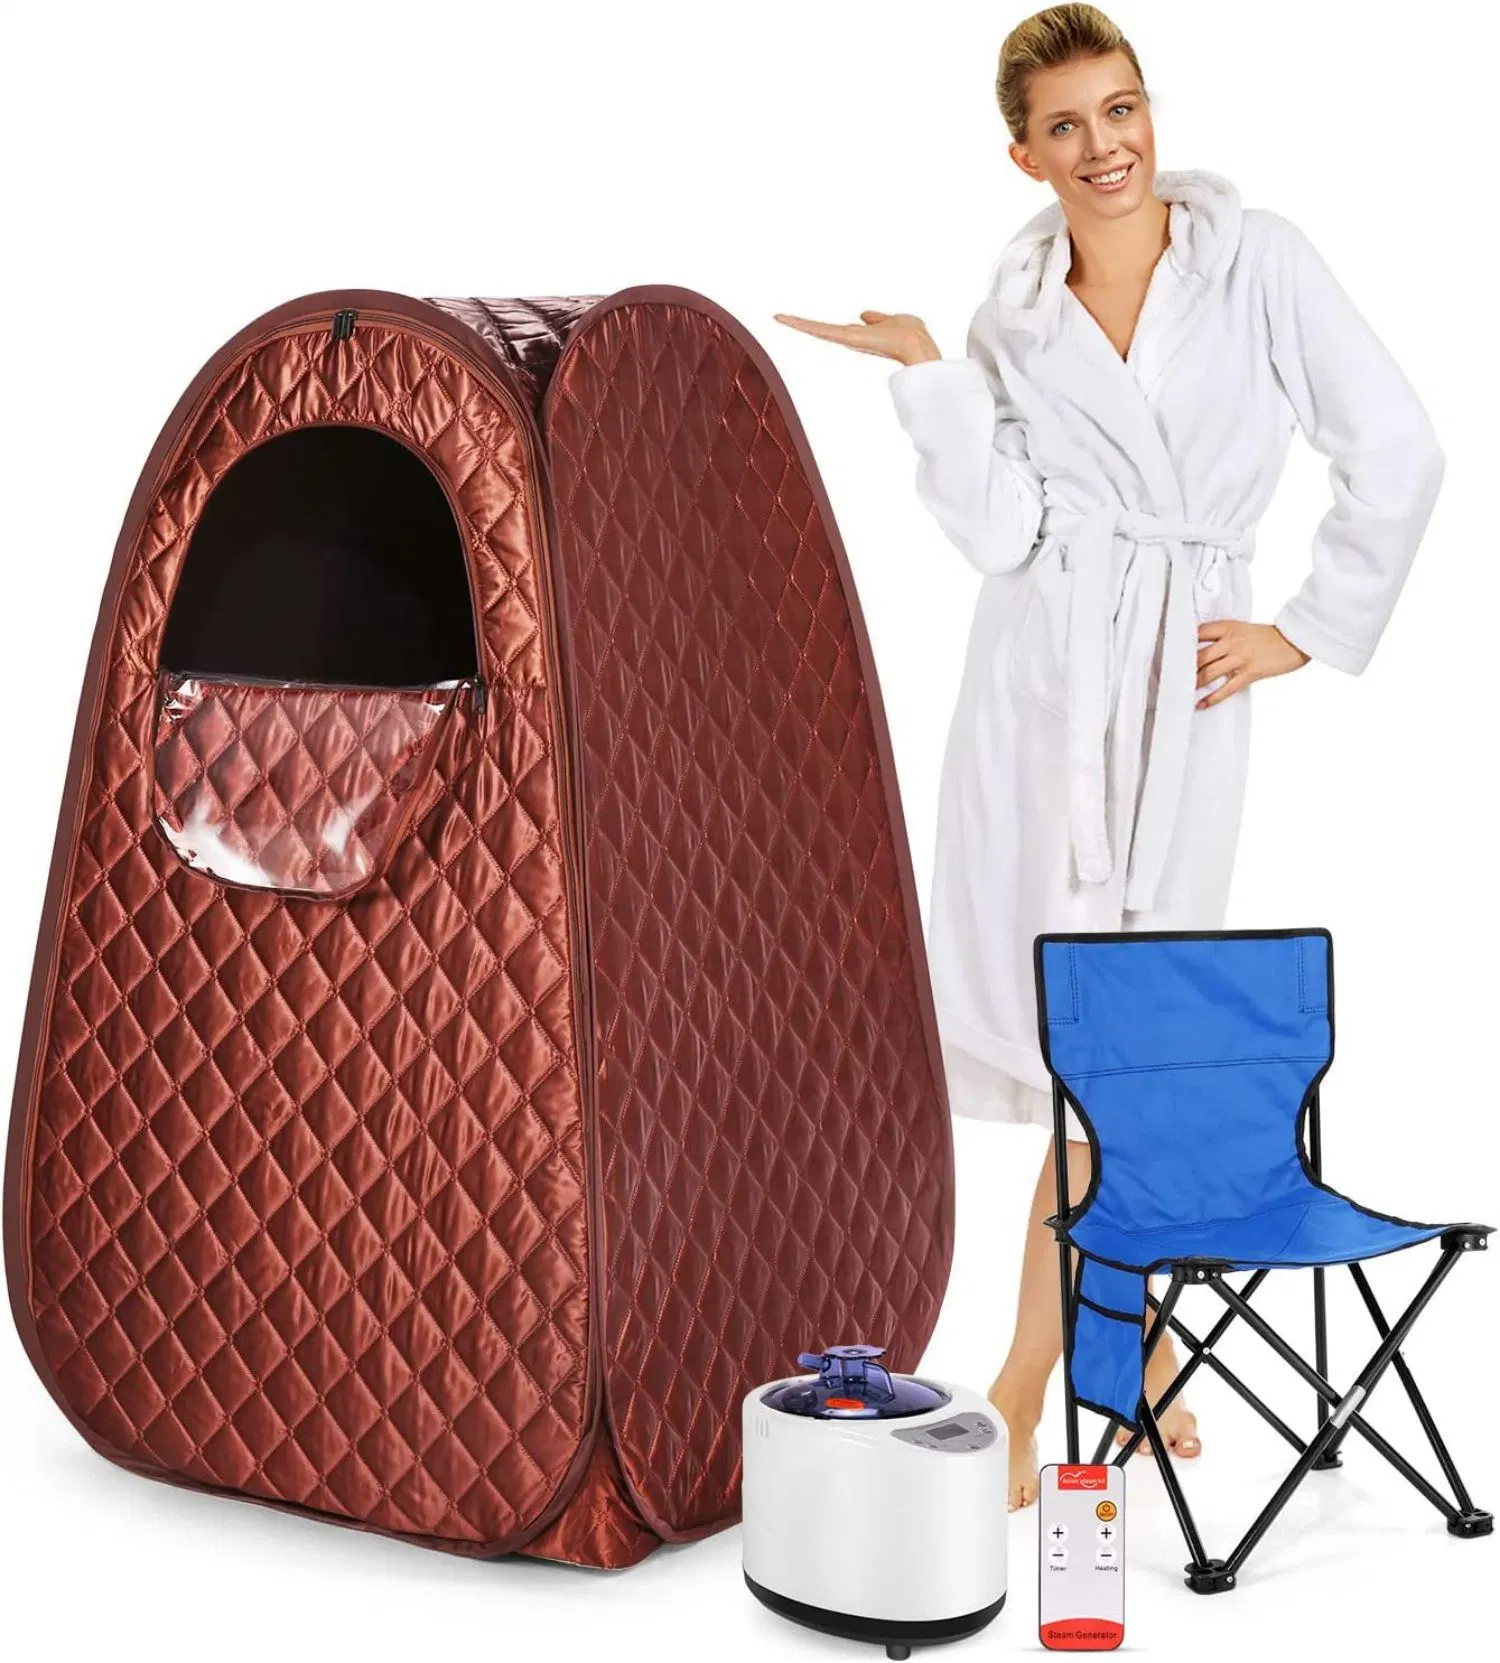 Portable Steam Sauna SPA for Therapeutic Relaxation Detox at Home